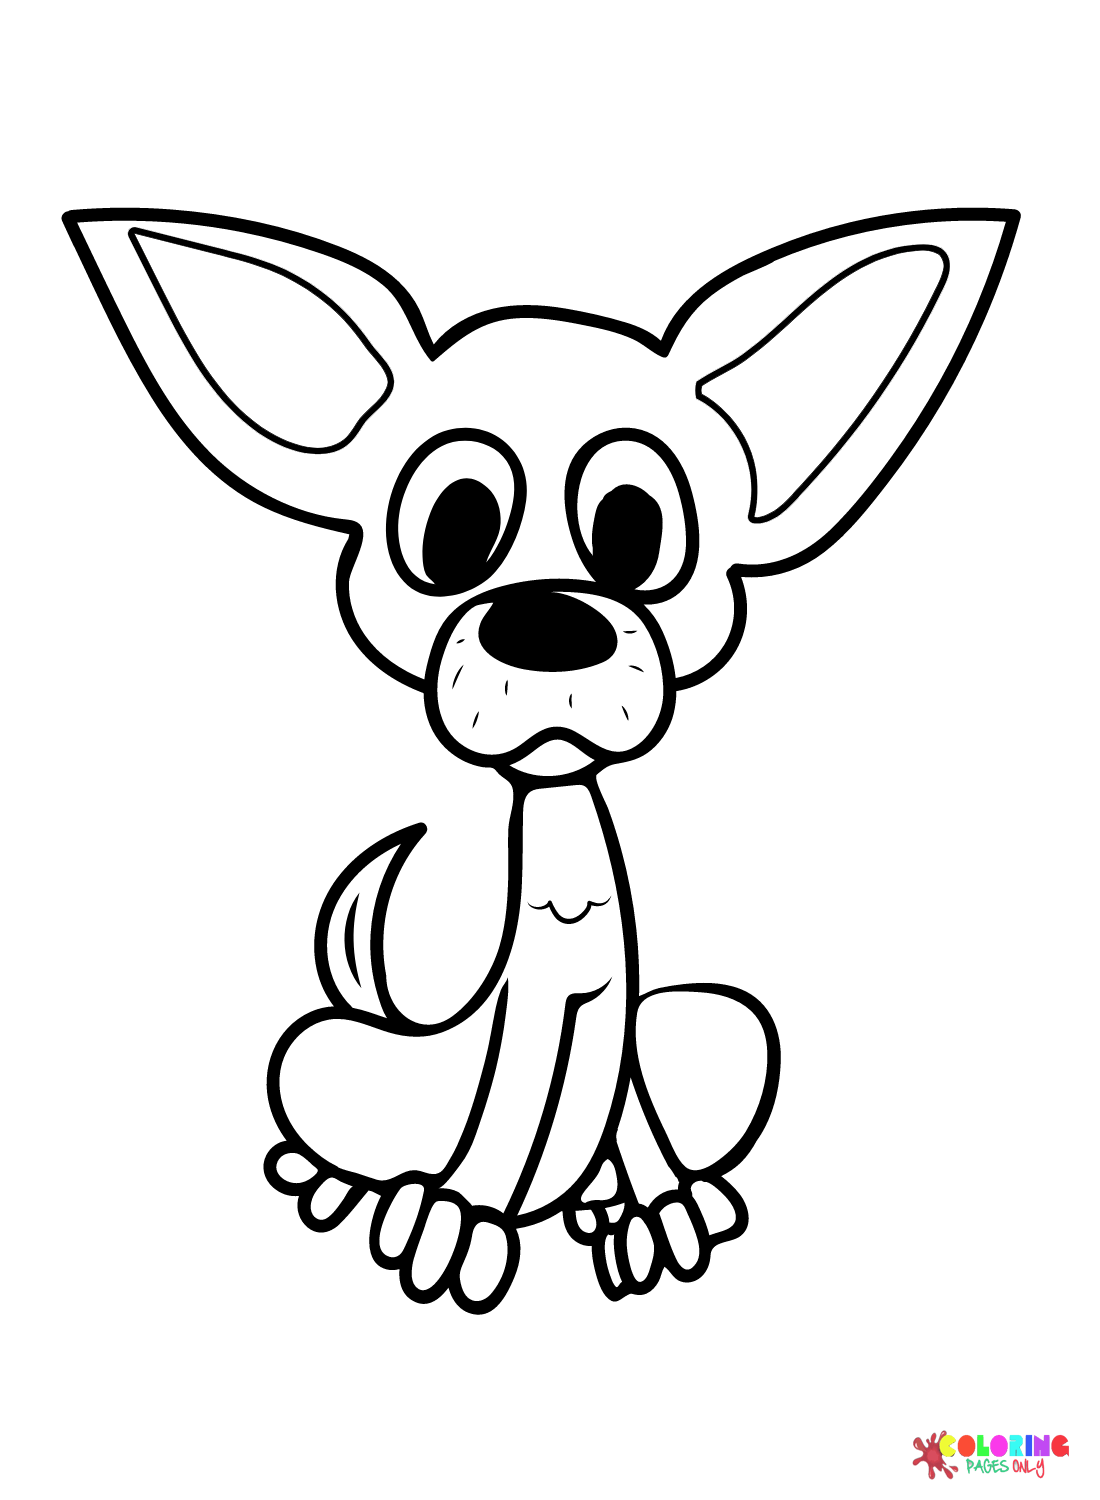 Funny Chihuahua Coloring Pages